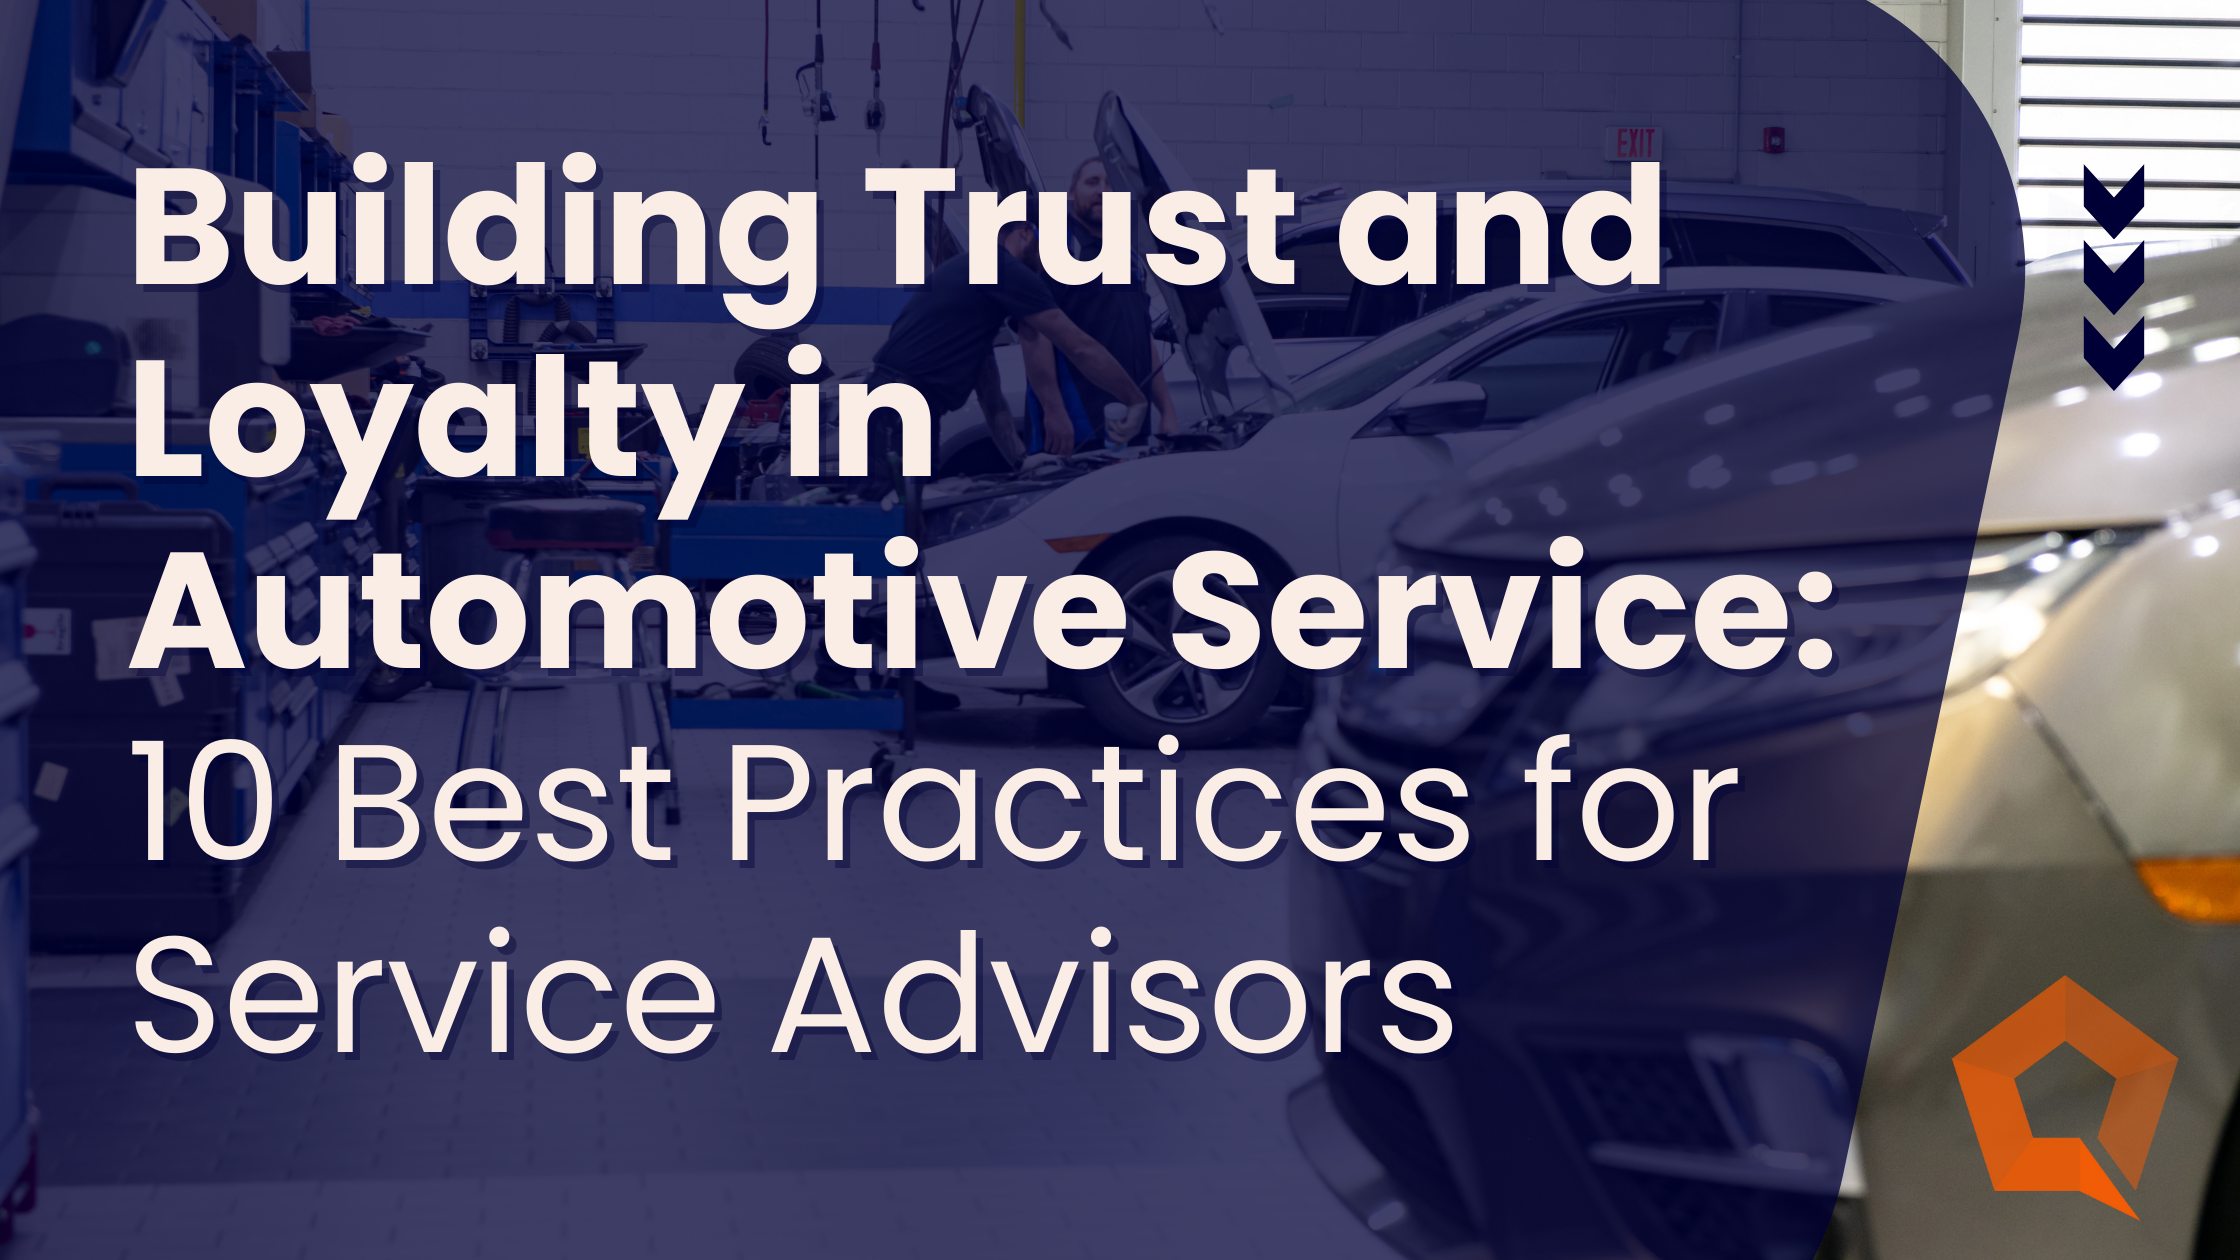 Building Trust and Loyalty in Automotive Service: 10 Best Practices for Service Advisors